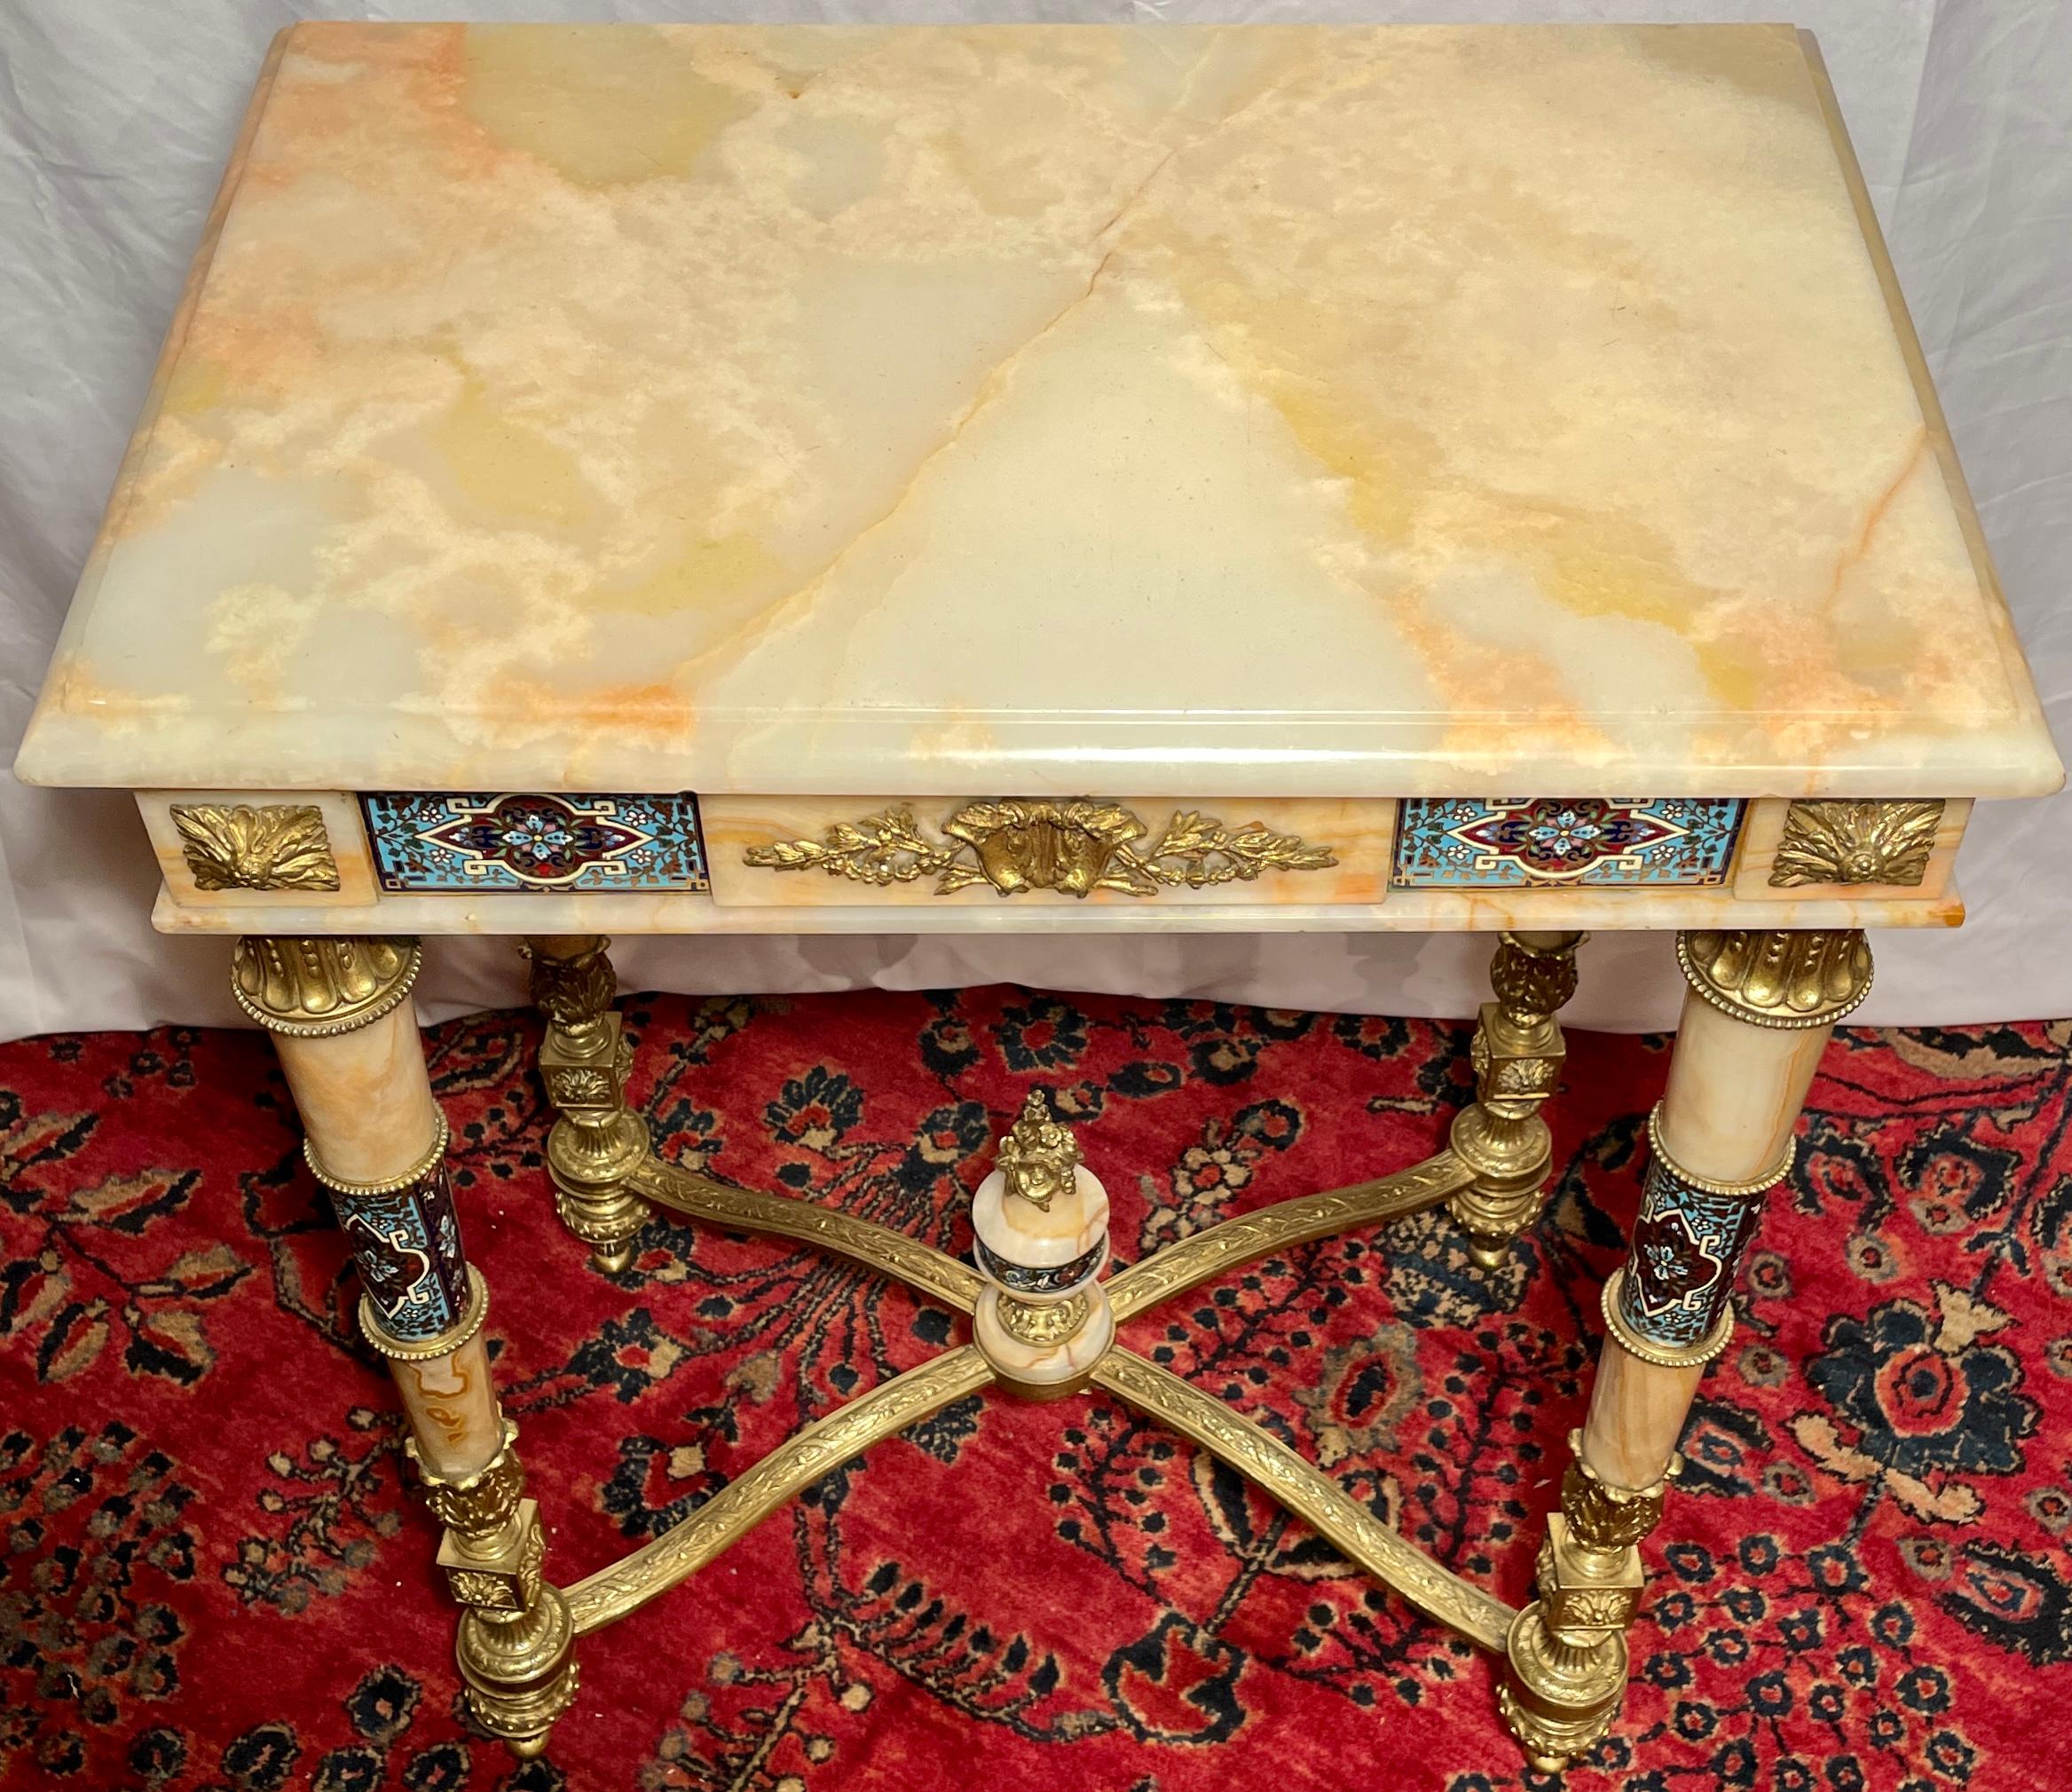 French Antique Russian Onyx Marble, Ormolu and Enamel Porcelain Table, Circa 1875-1885 For Sale